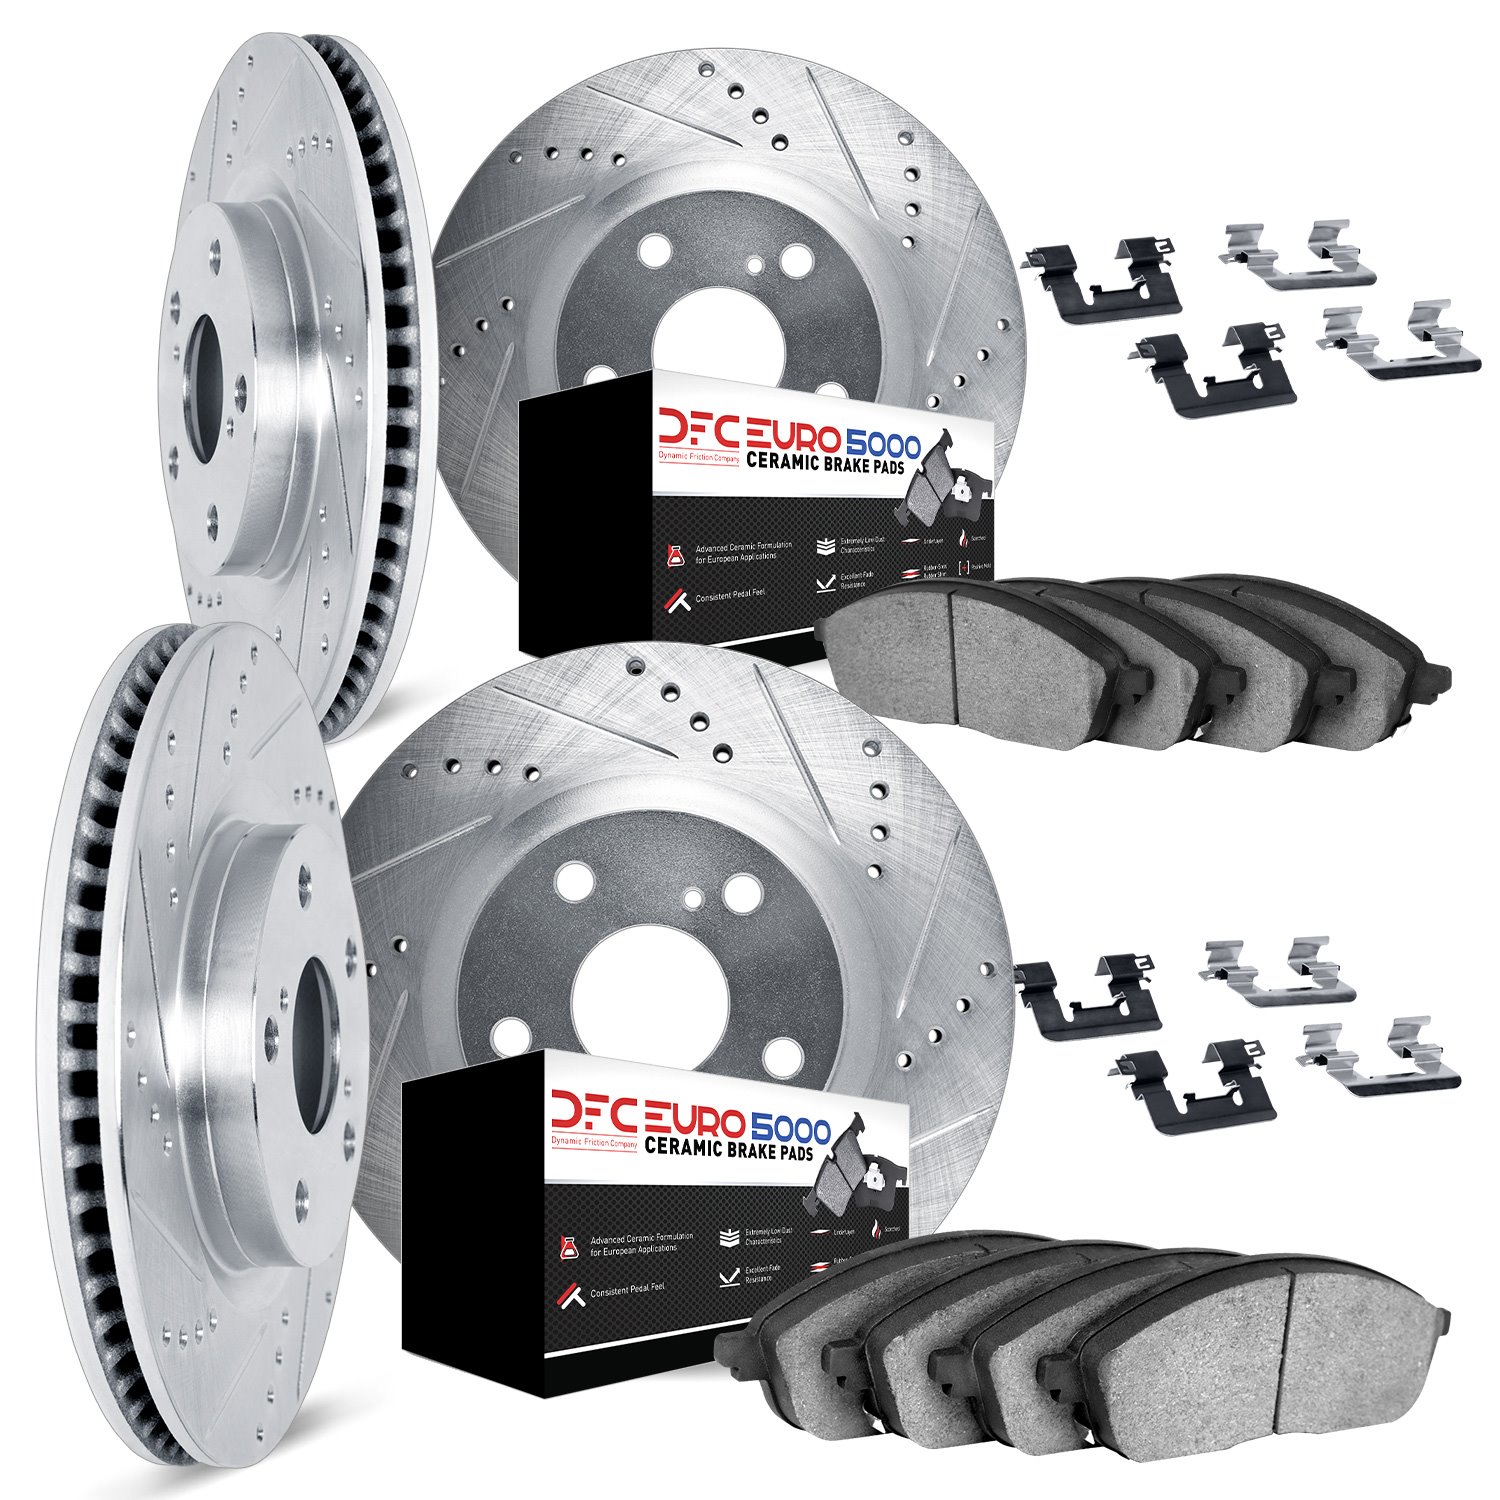 7614-31024 Drilled/Slotted Brake Rotors w/5000 Euro Ceramic Brake Pads Kit & Hardware [Silver], 2007-2015 BMW, Position: Front a